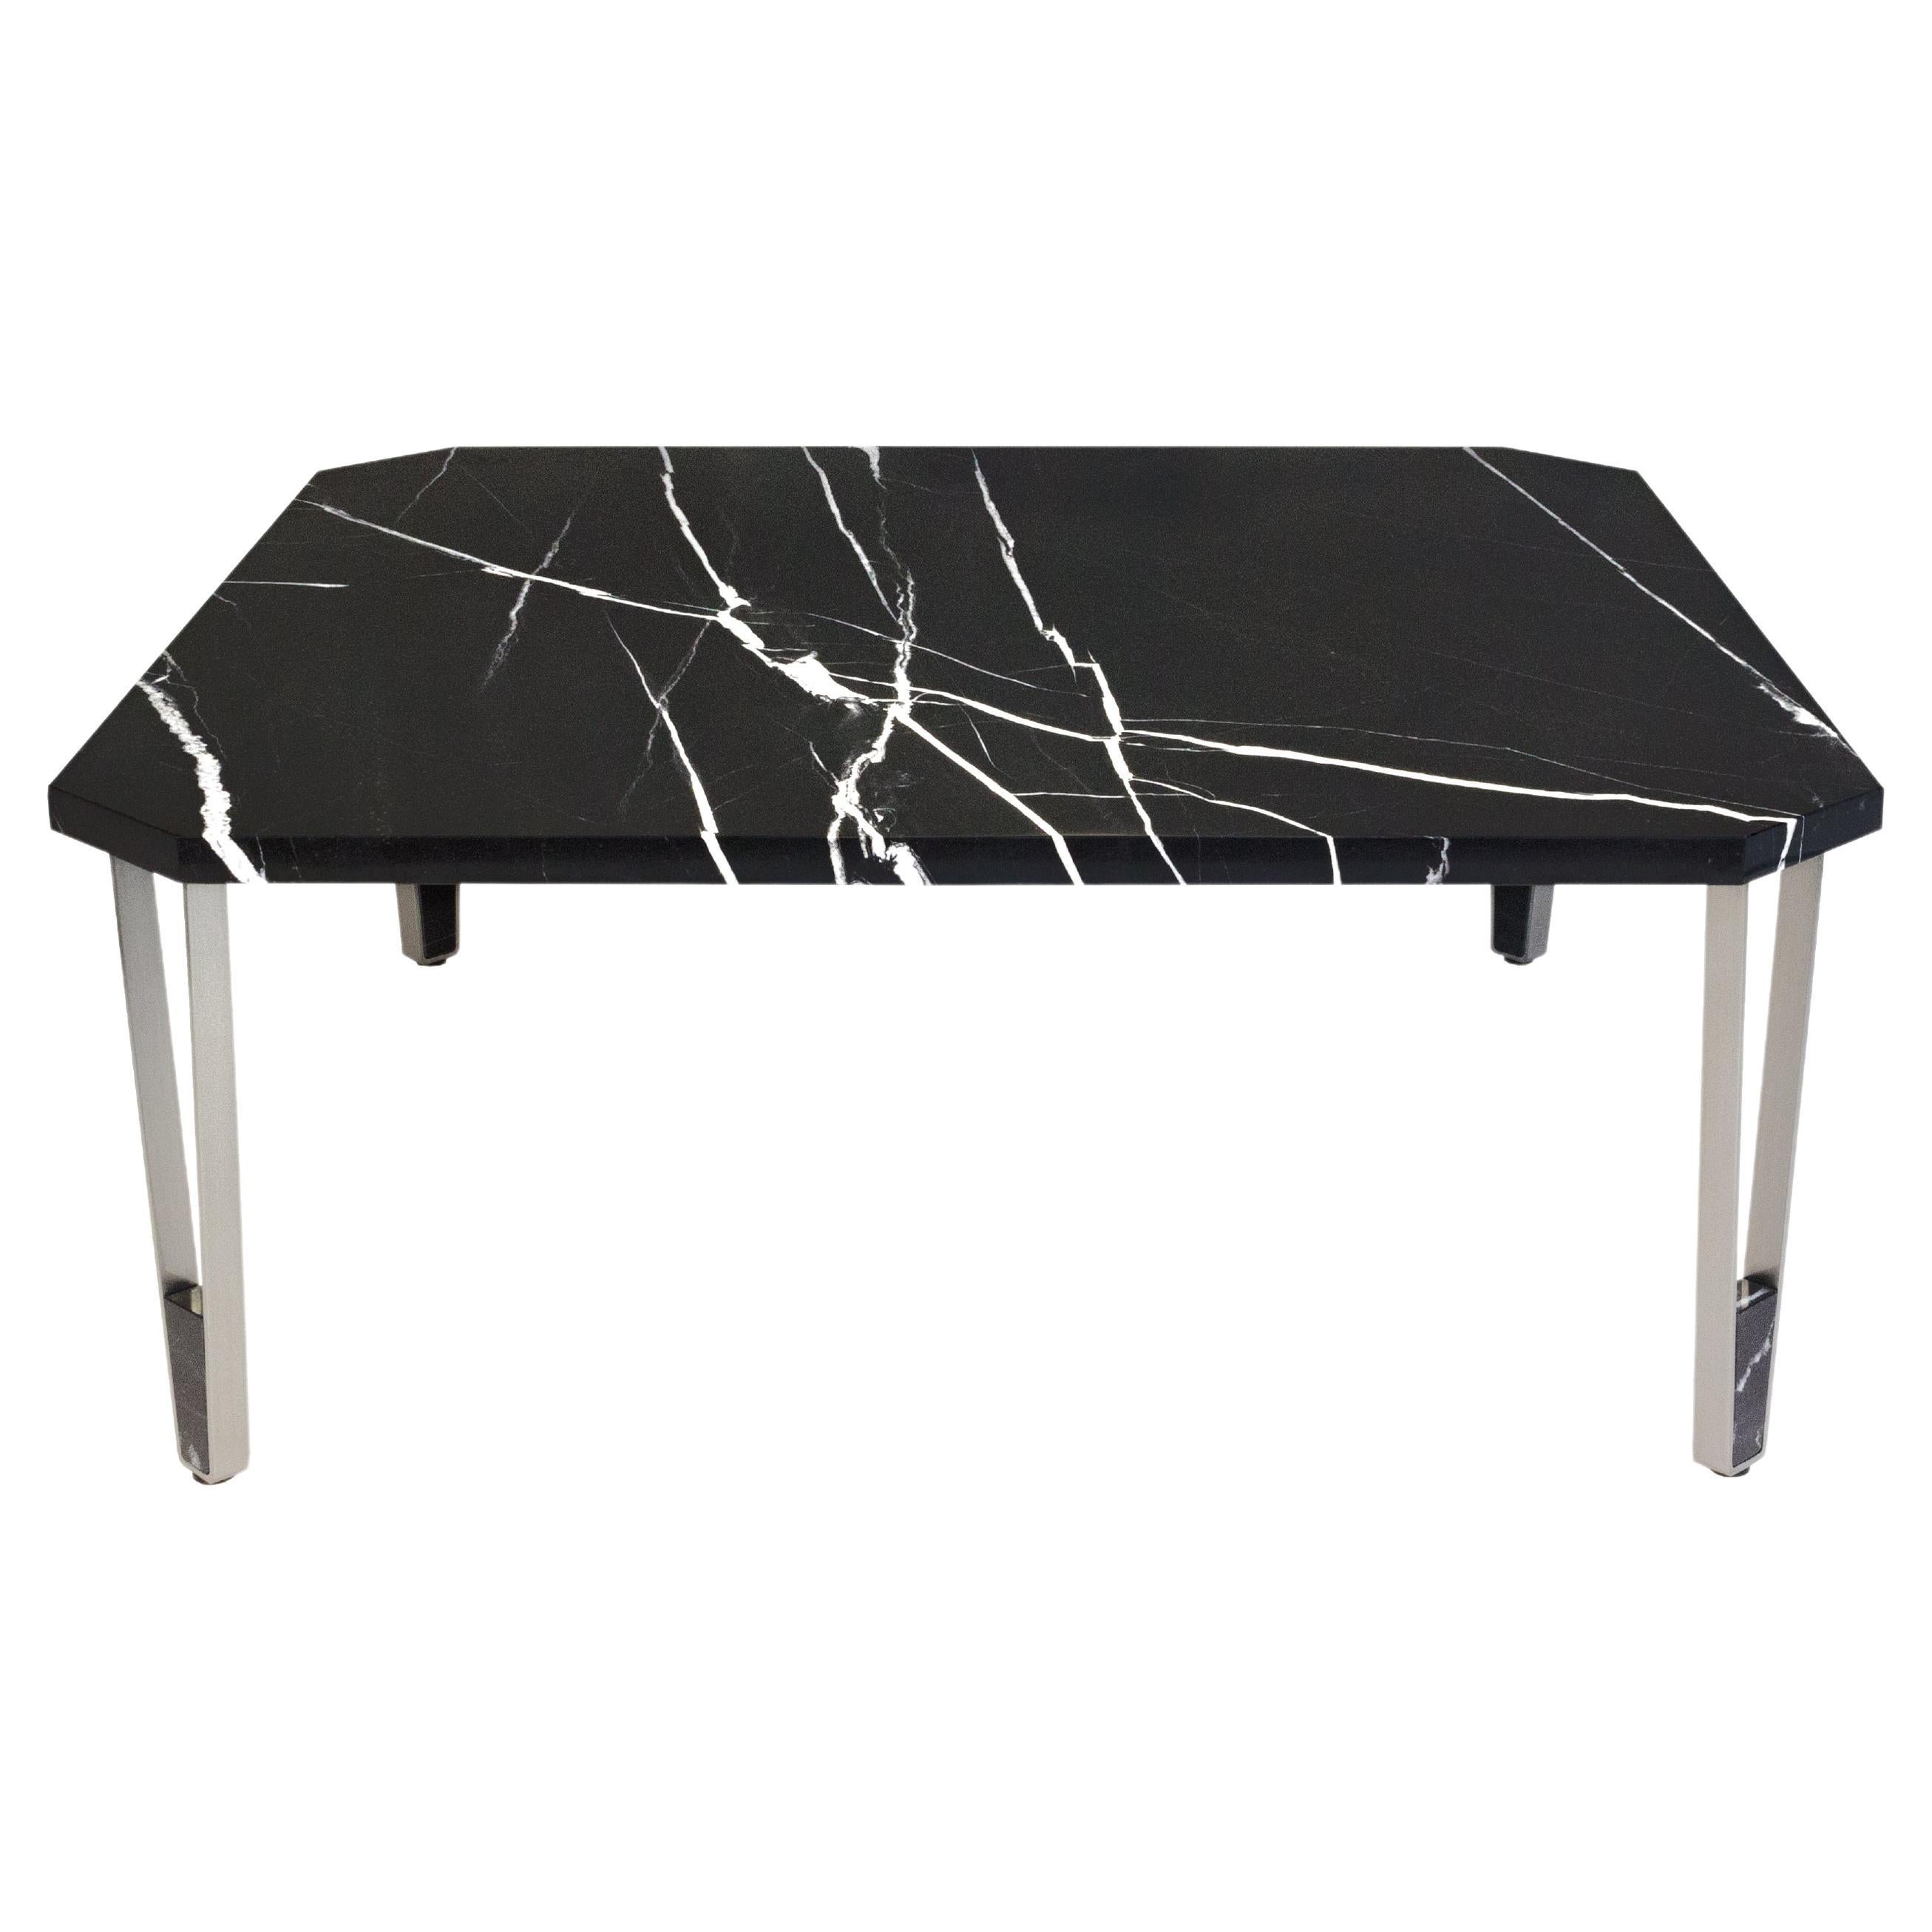 Ionic Square Nero Marquina Marble Coffee Table by InsidherLand